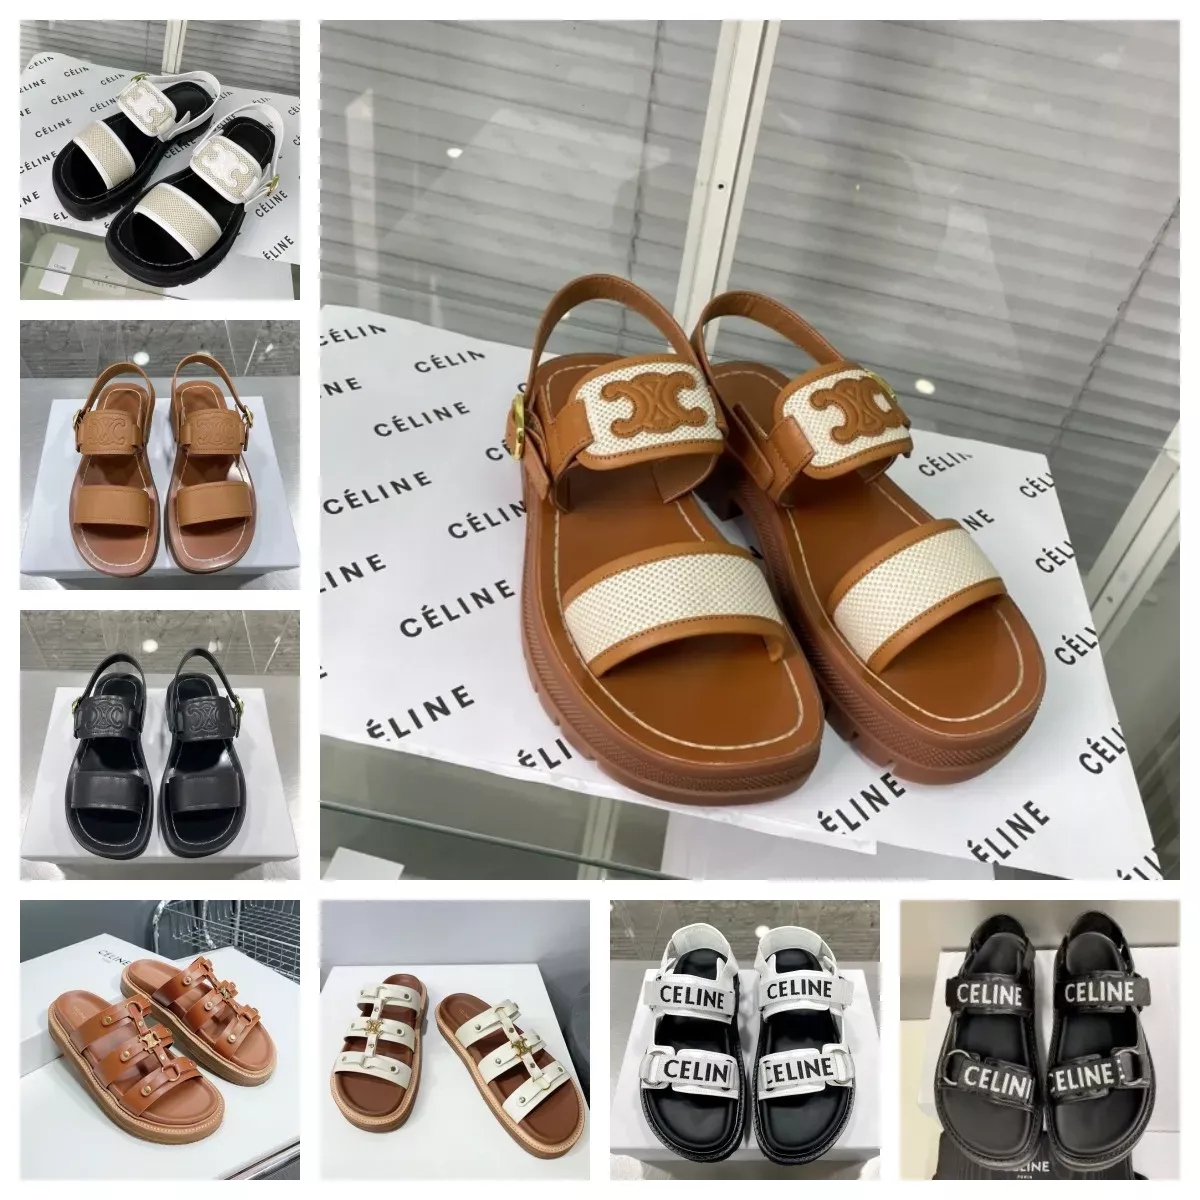 DHgate Gucci Bloom Slides with Links! 